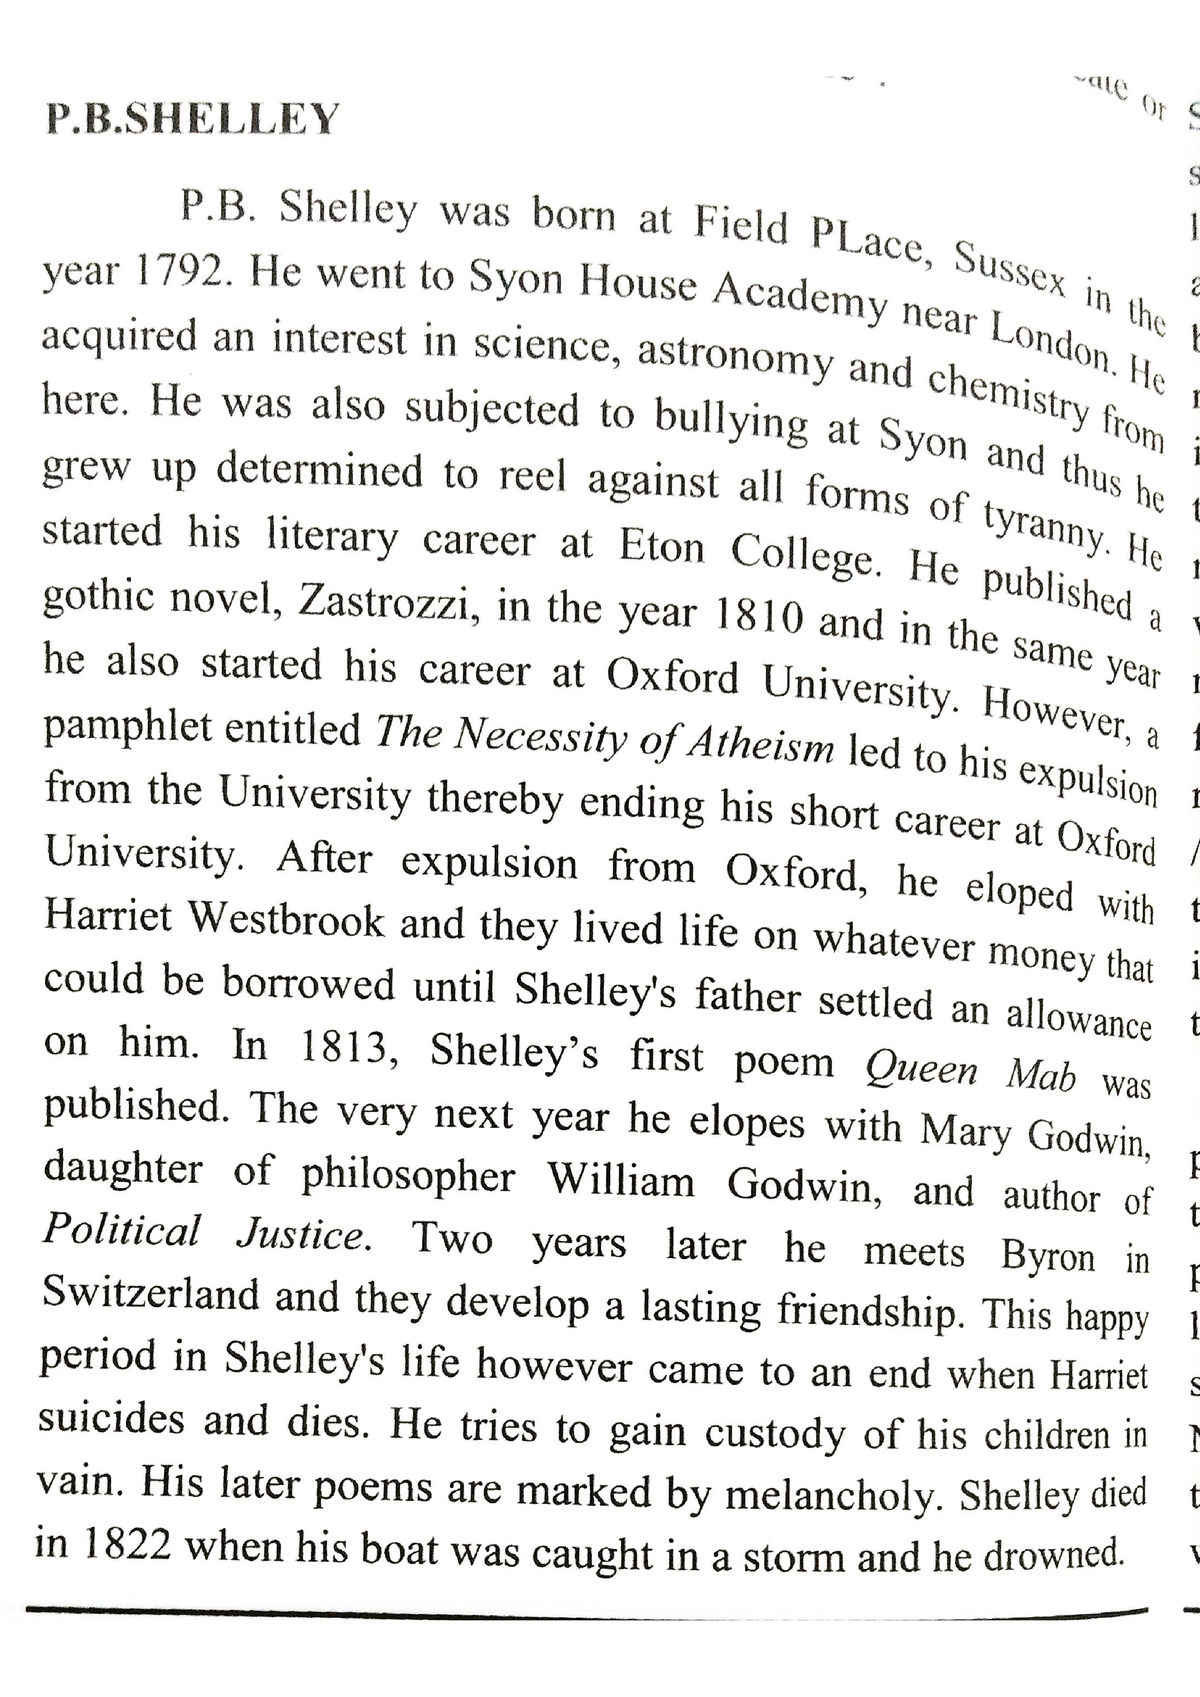 P.b shelley - P.B Op P. Shelley was born at Field Place. , year 1792 ...